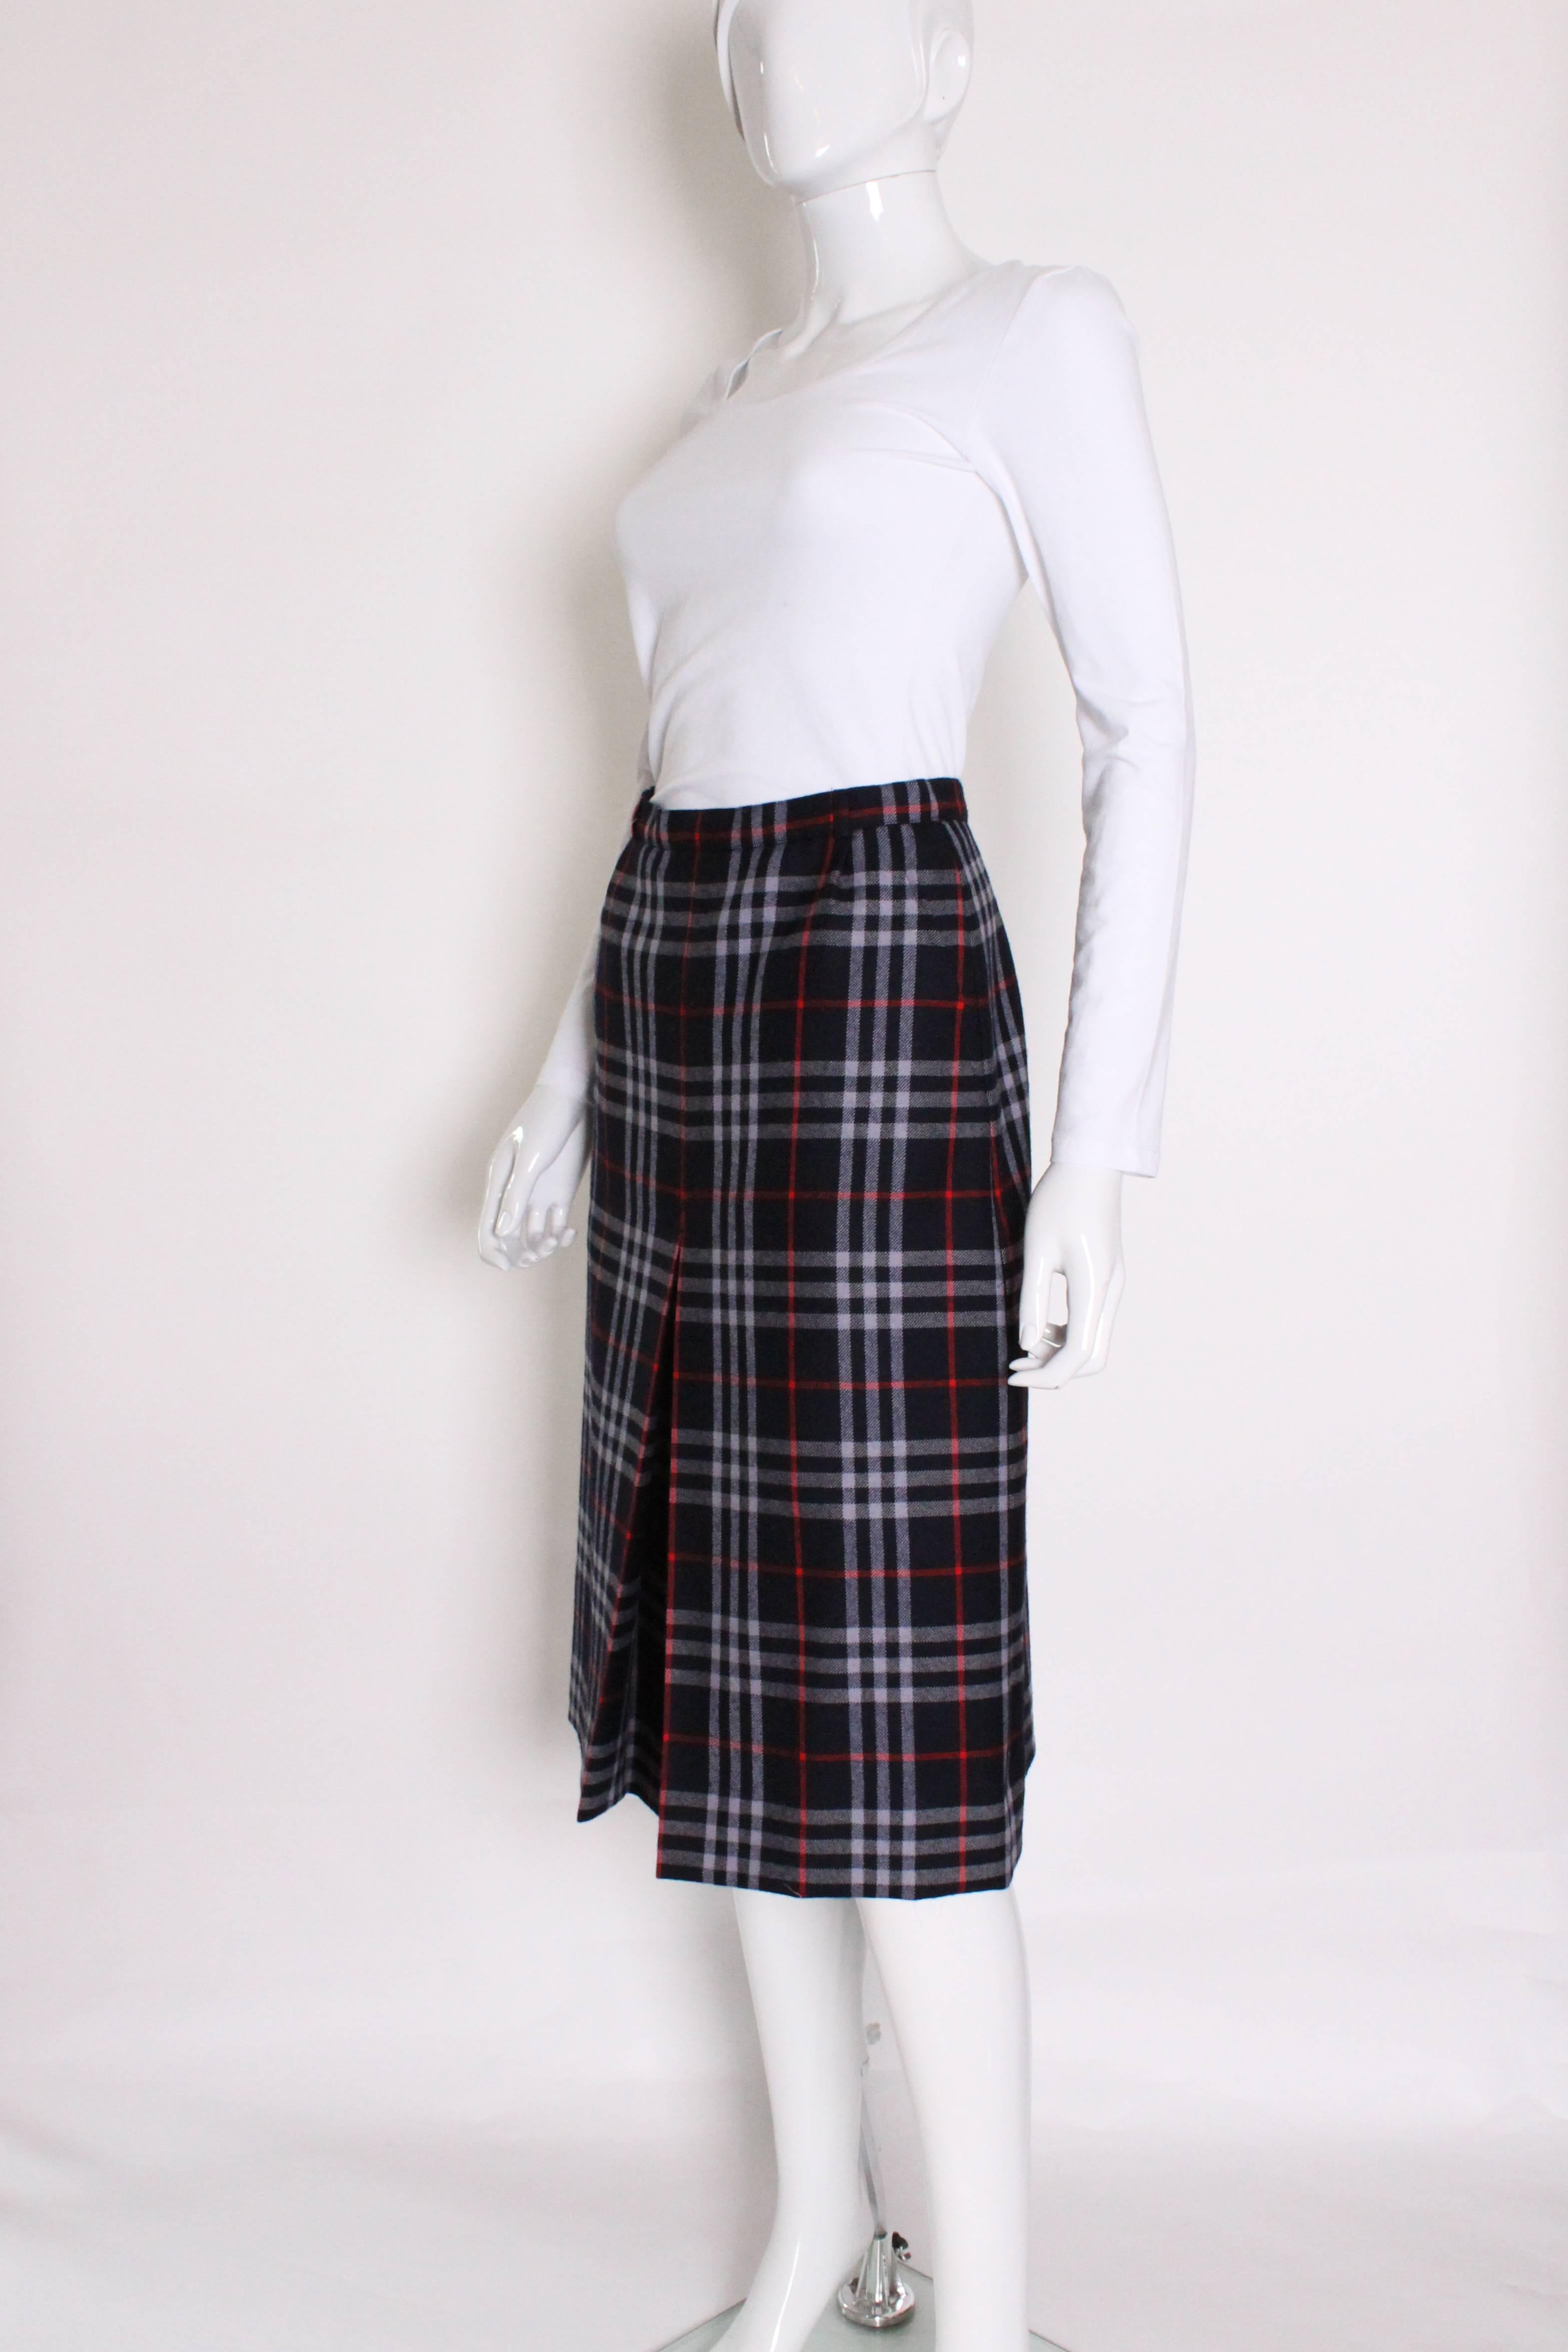 An English classic, a check wool skirt from British fashion house Burberry.
This skirt has a navy background , with a red and pale blue check.
There is a central front pleat, 2 sloping pockets on the front and a central back zip. The skirt has belt